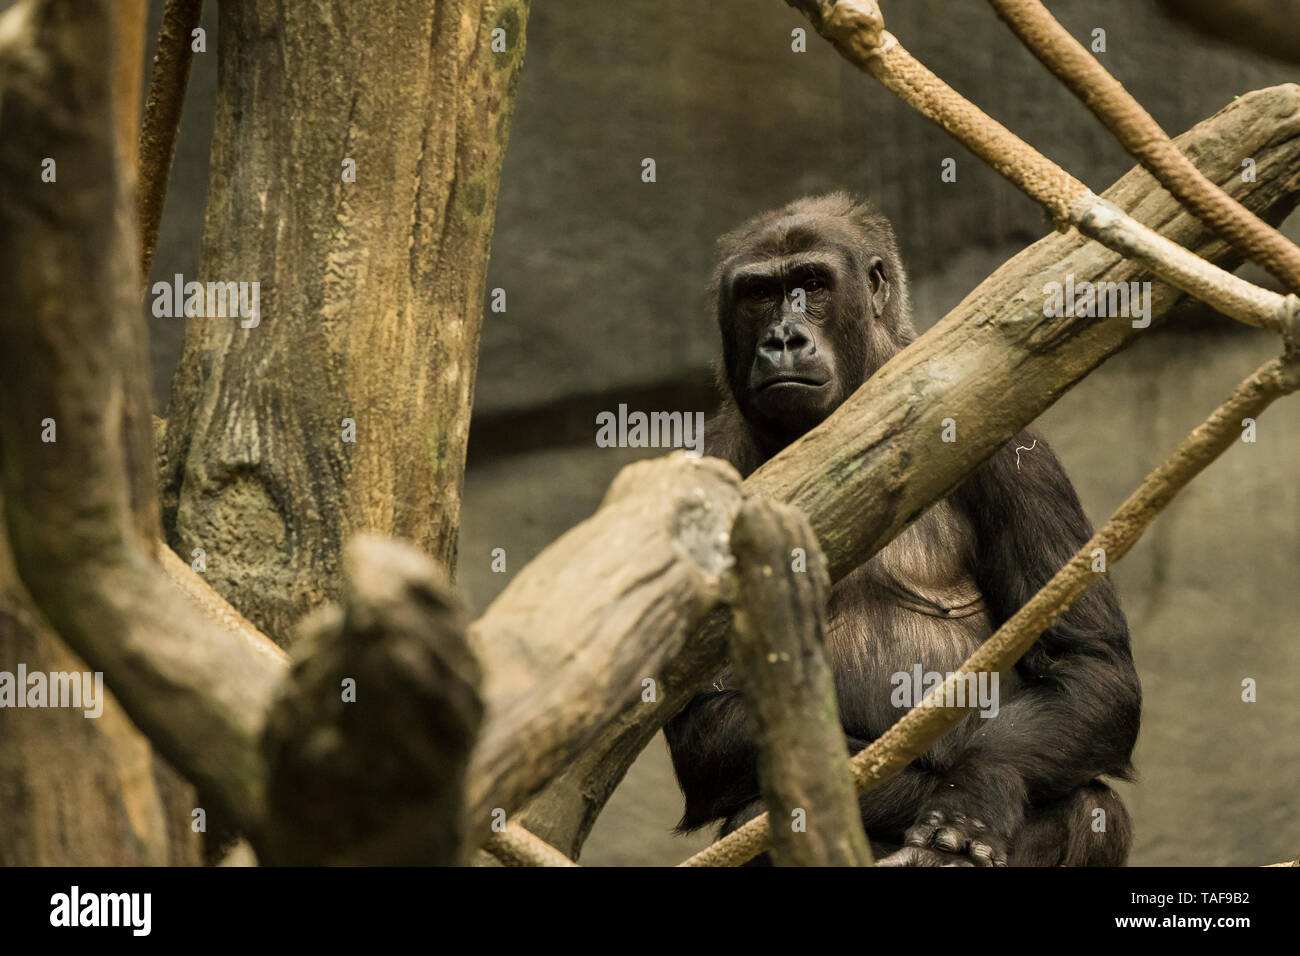 An adult gorilla looking towards the camera in its exhibit. Stock Photo